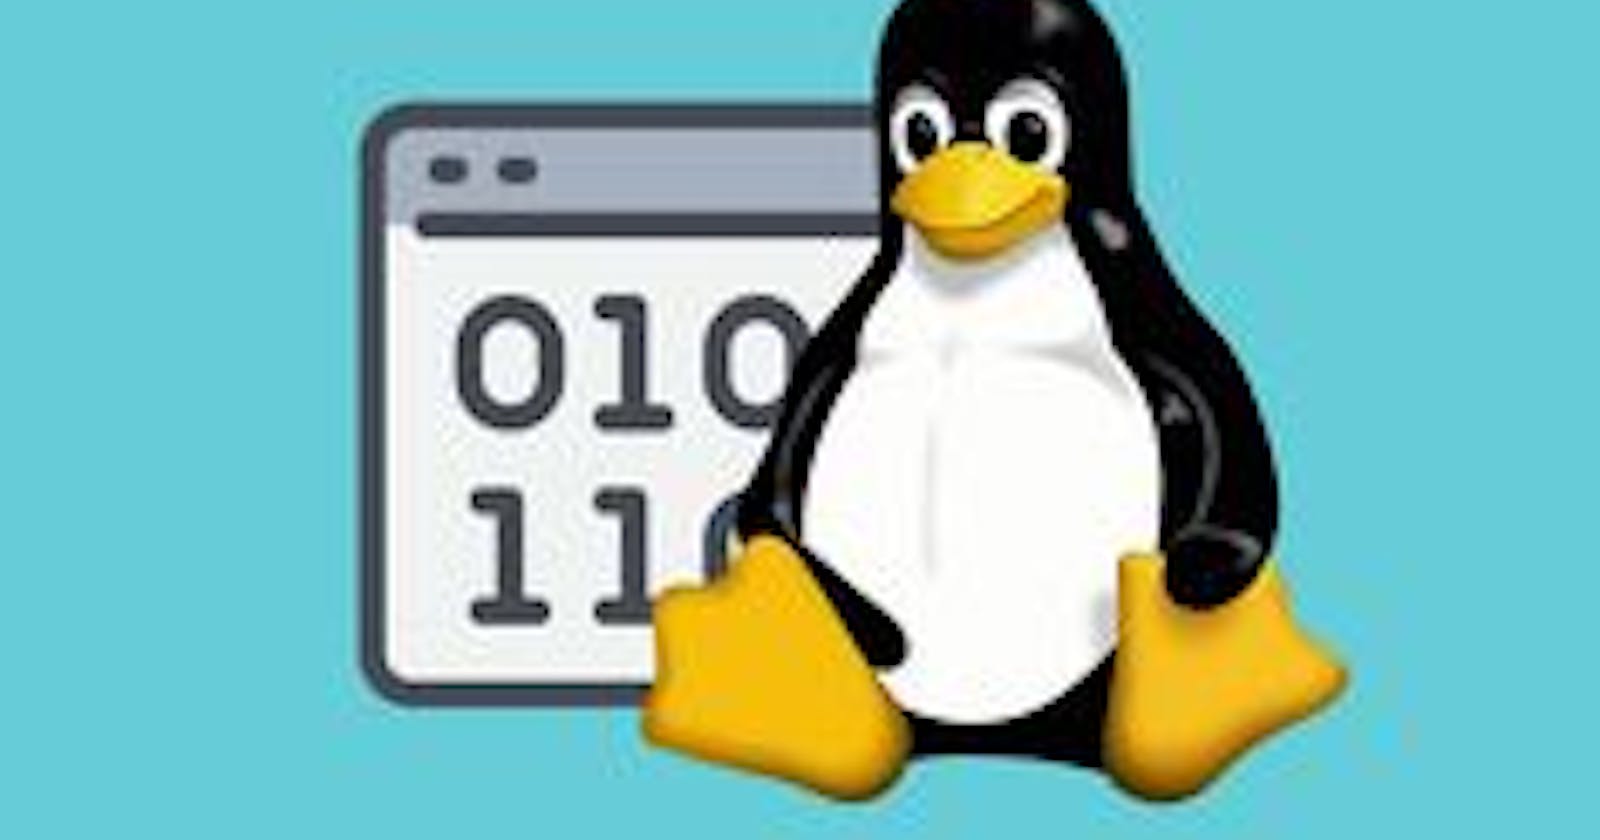 Managing Users, Groups and Permissions in Linux